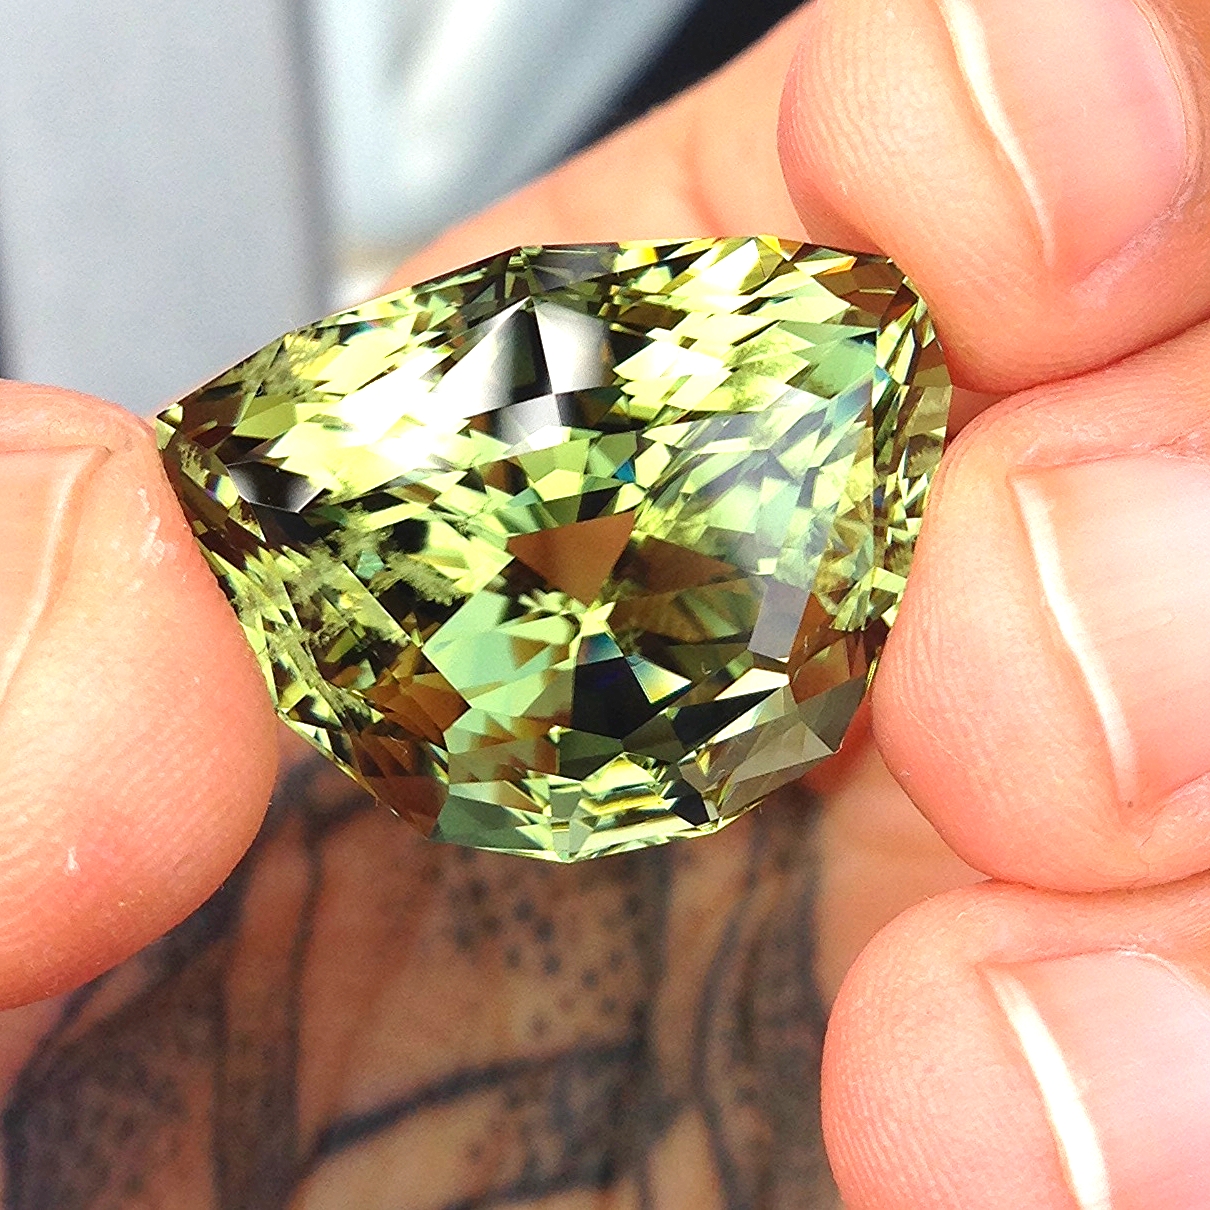   45 carat tourmaline form Mozambique, pulled from a 300 carat crystal.  